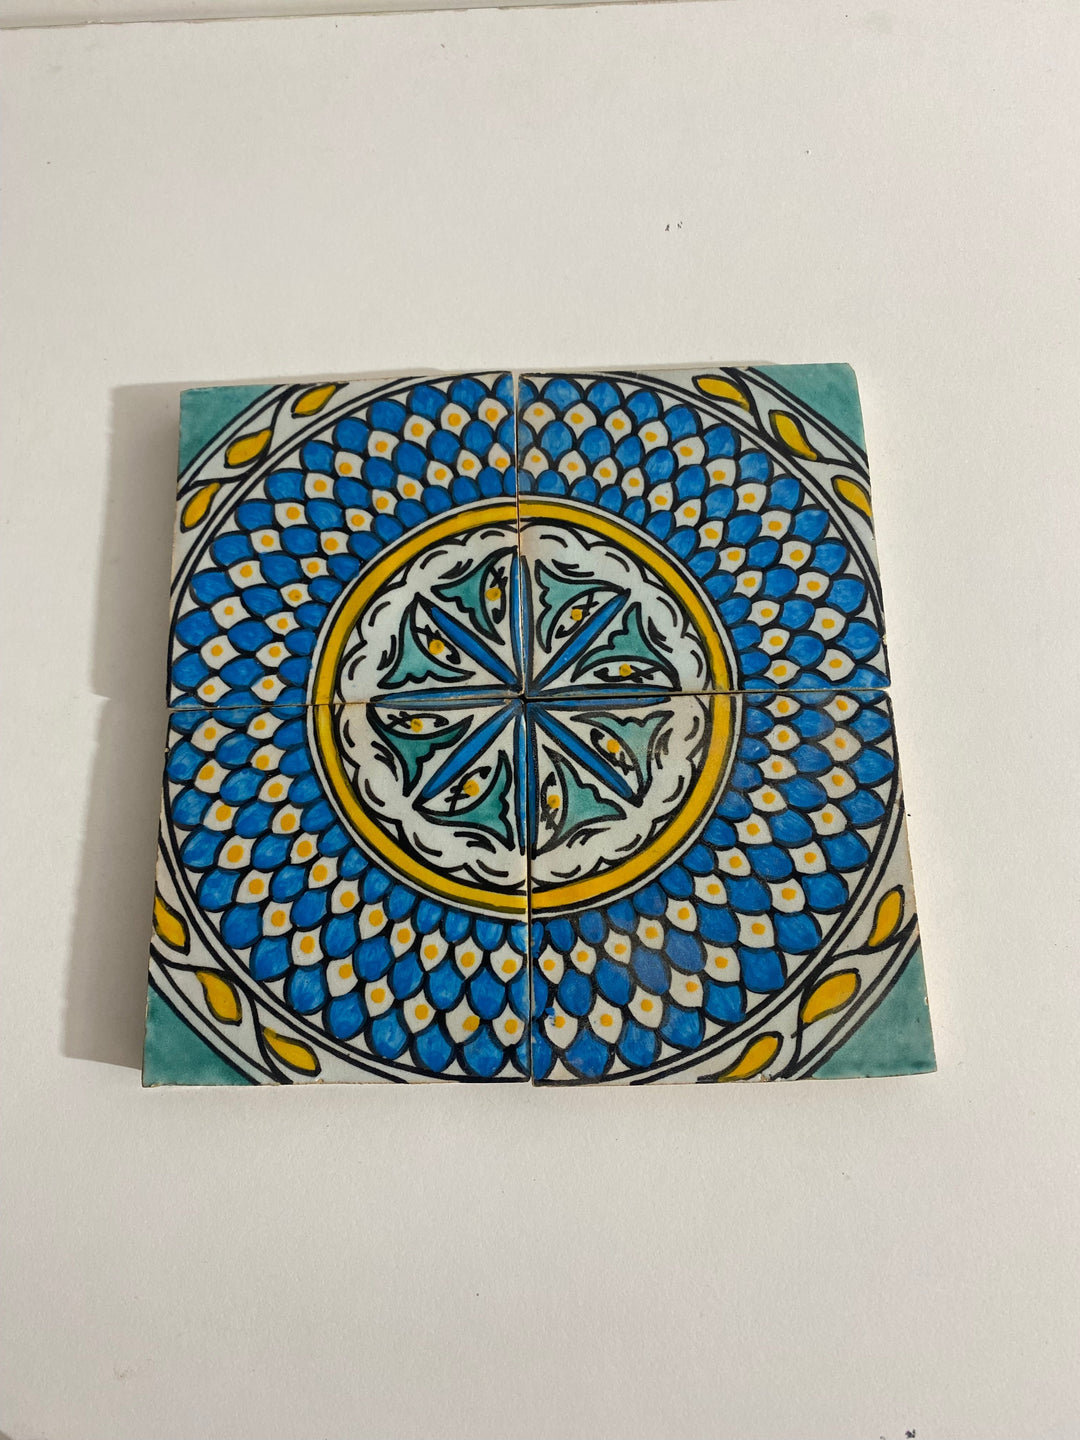 Mid century tiles Hand painted tiles 4"x4" 100% for Bathroom Remodeling and kitchen Projects works wall and ground